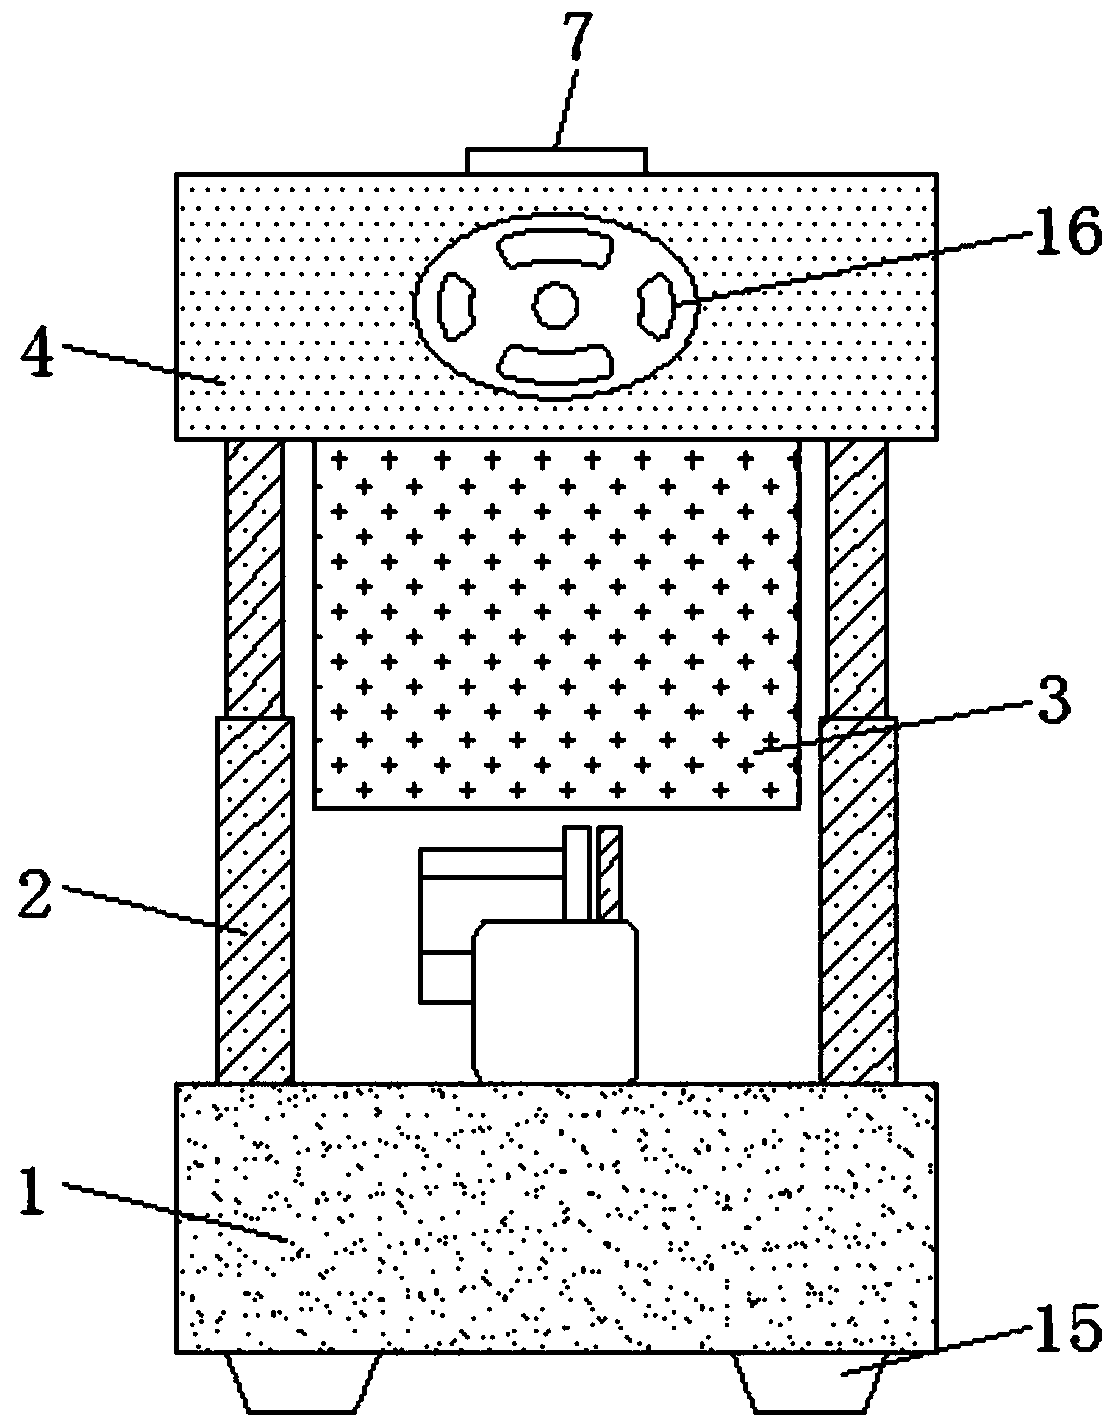 All-water-blown spraying mechanism for high heat-resistance sound absorbing sponge used for automobiles